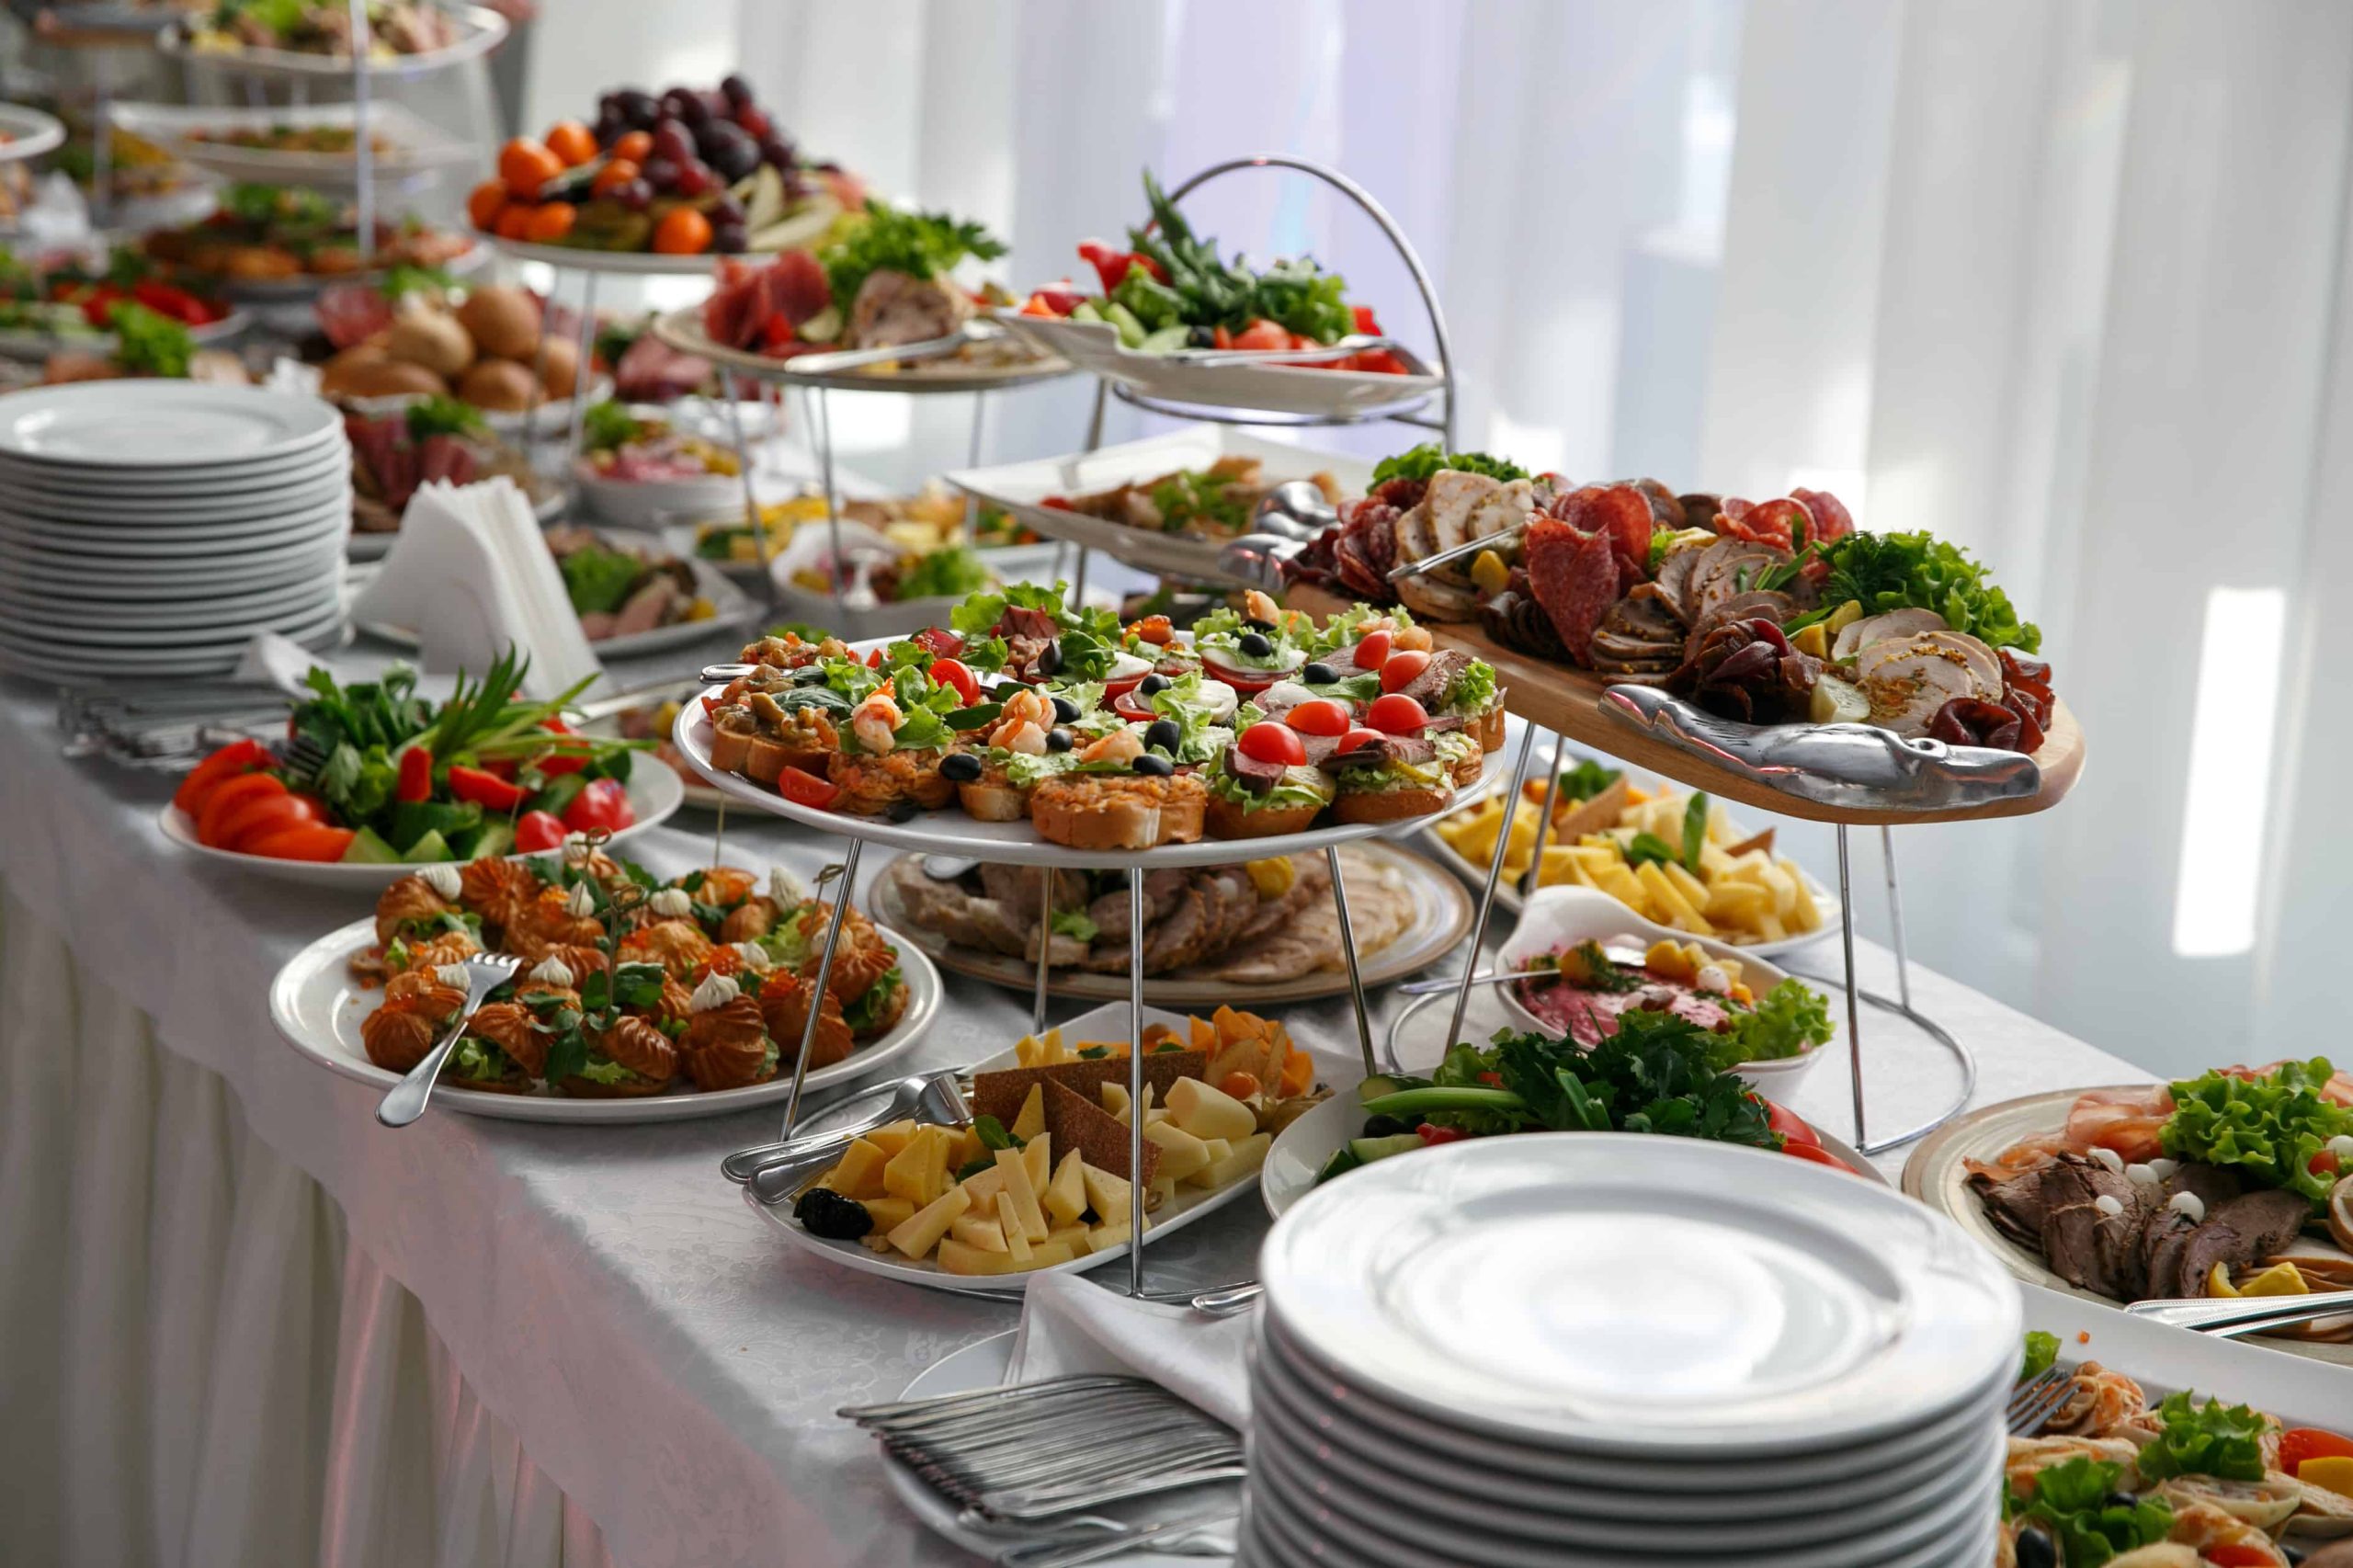 catering-service-restaurant-table-with-snacks-food-event